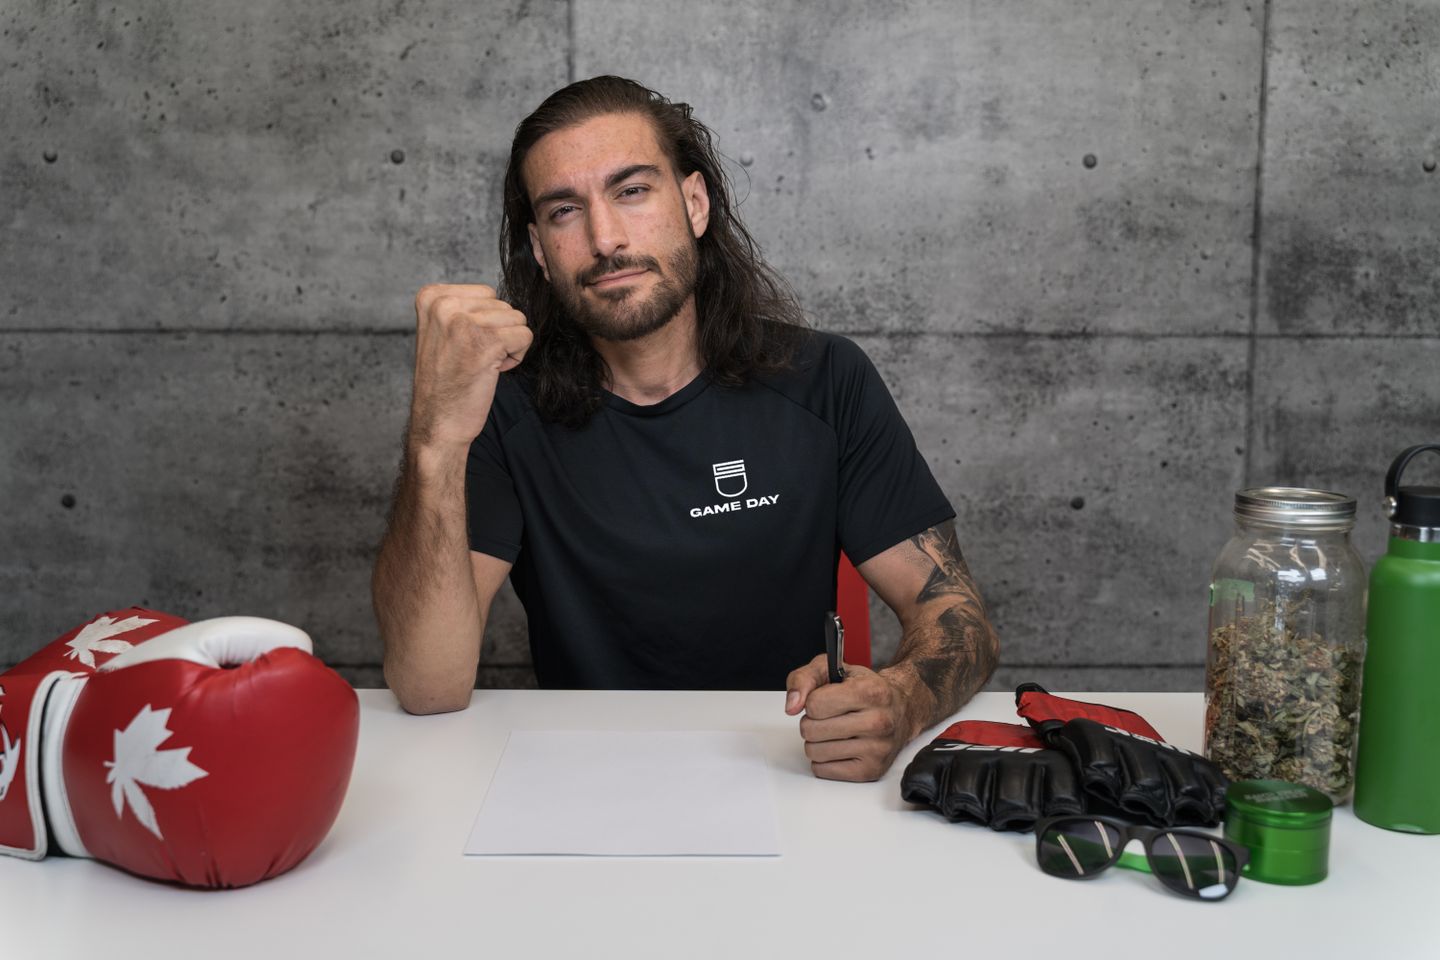 GAME DAY Secures First Round Draft Pick Elias Theodorou Cannabis Athlete and UFC Veteran